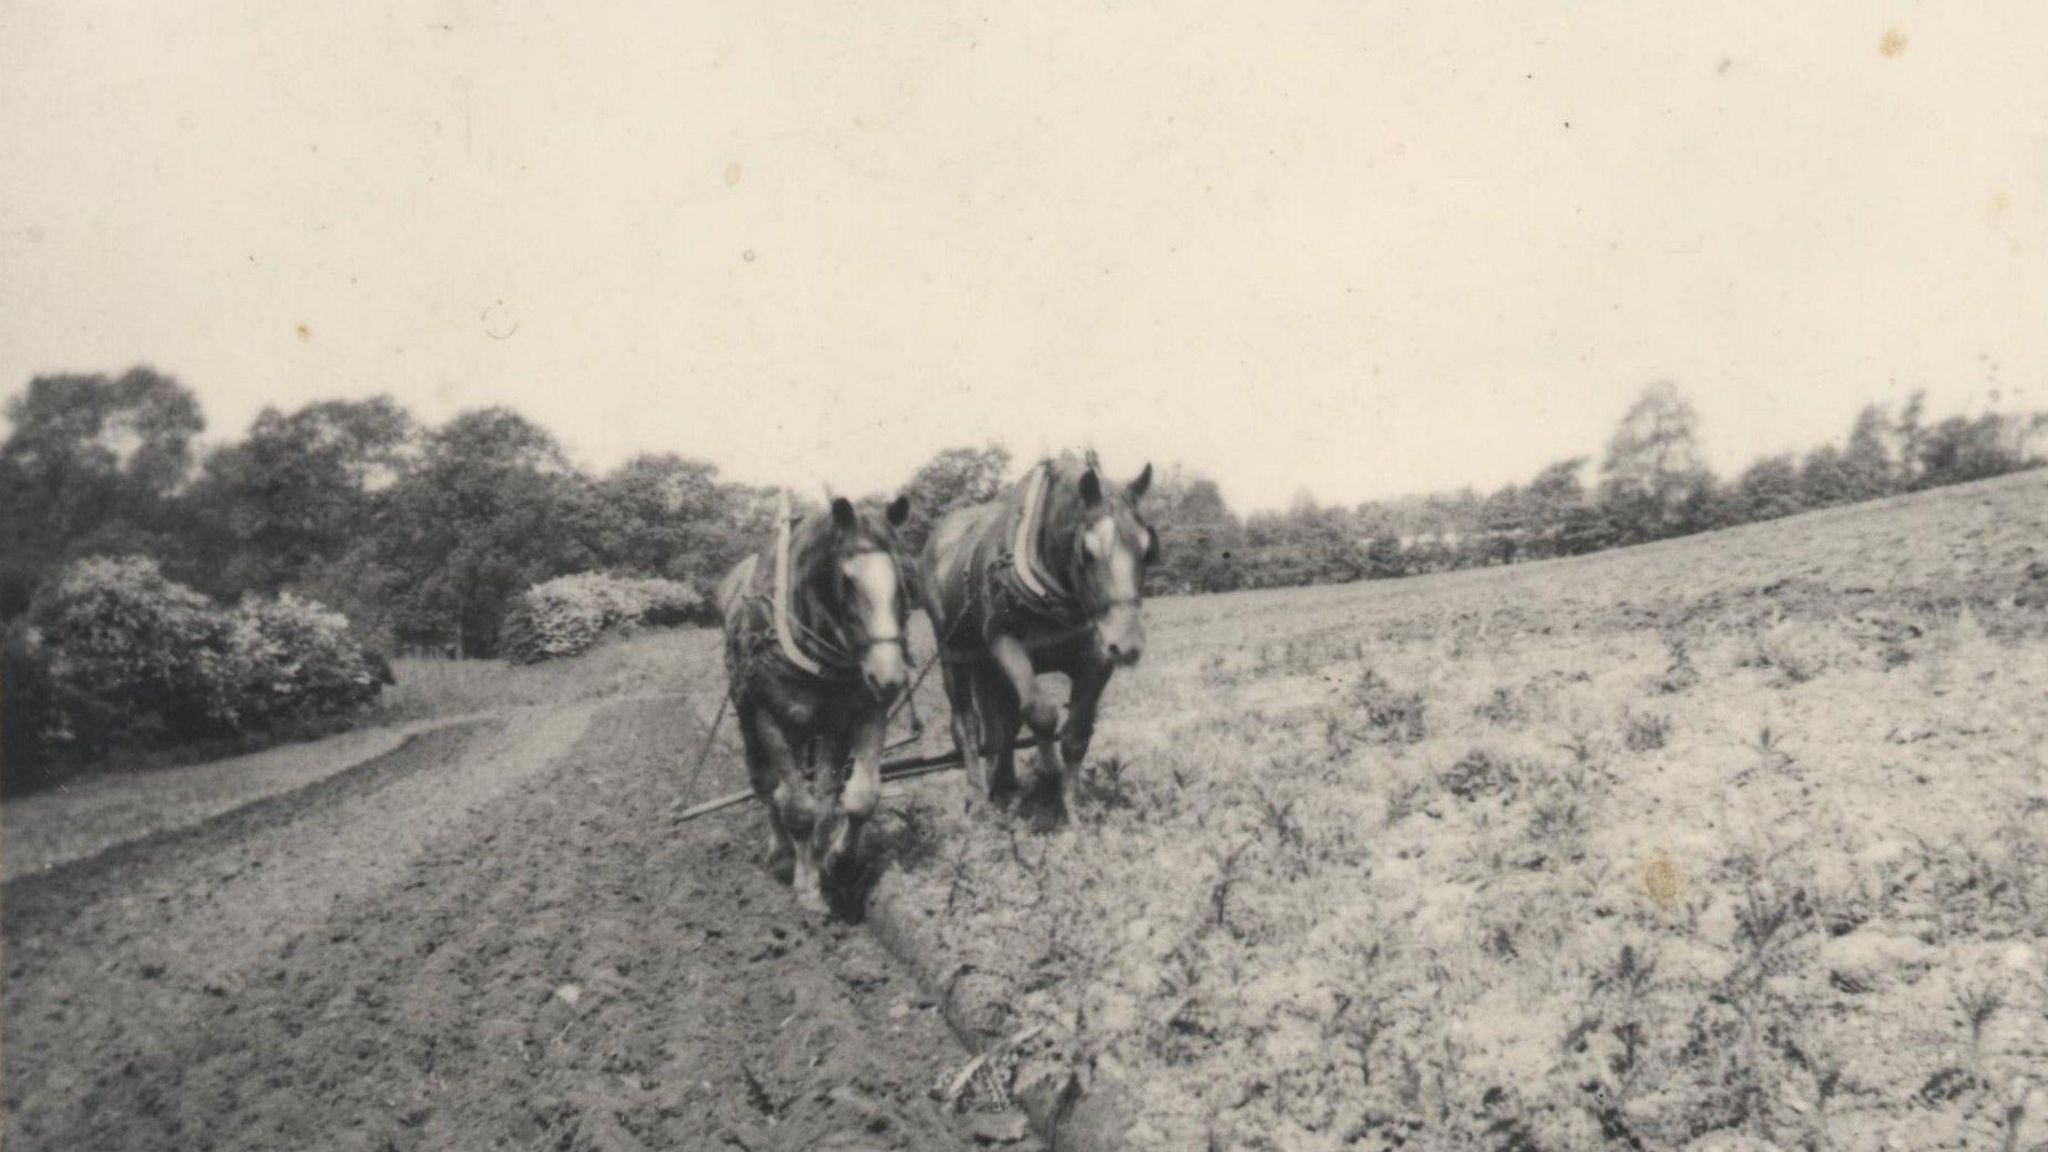 Previous Suffolk horses at Abbot's Hall